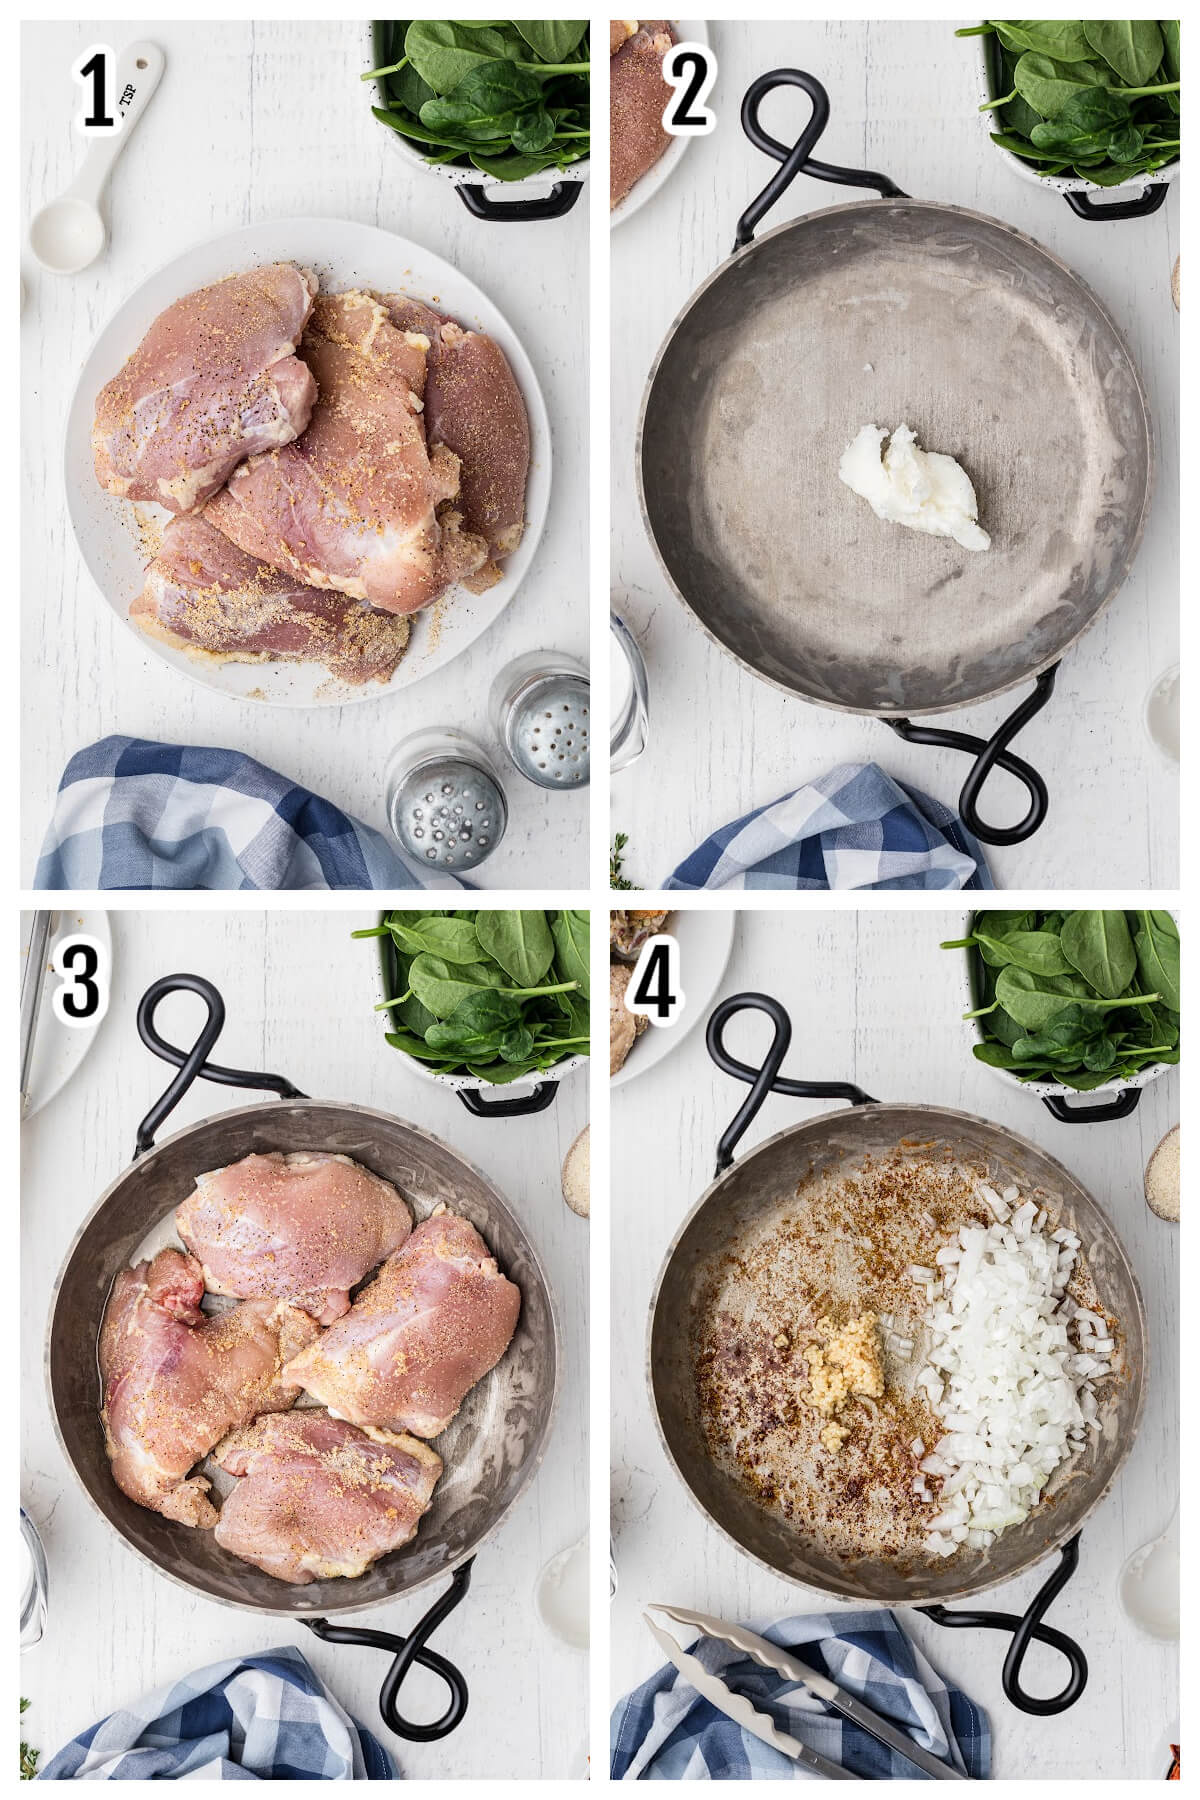 First set of instructions for preparing Tuscan chicken low carb version. 